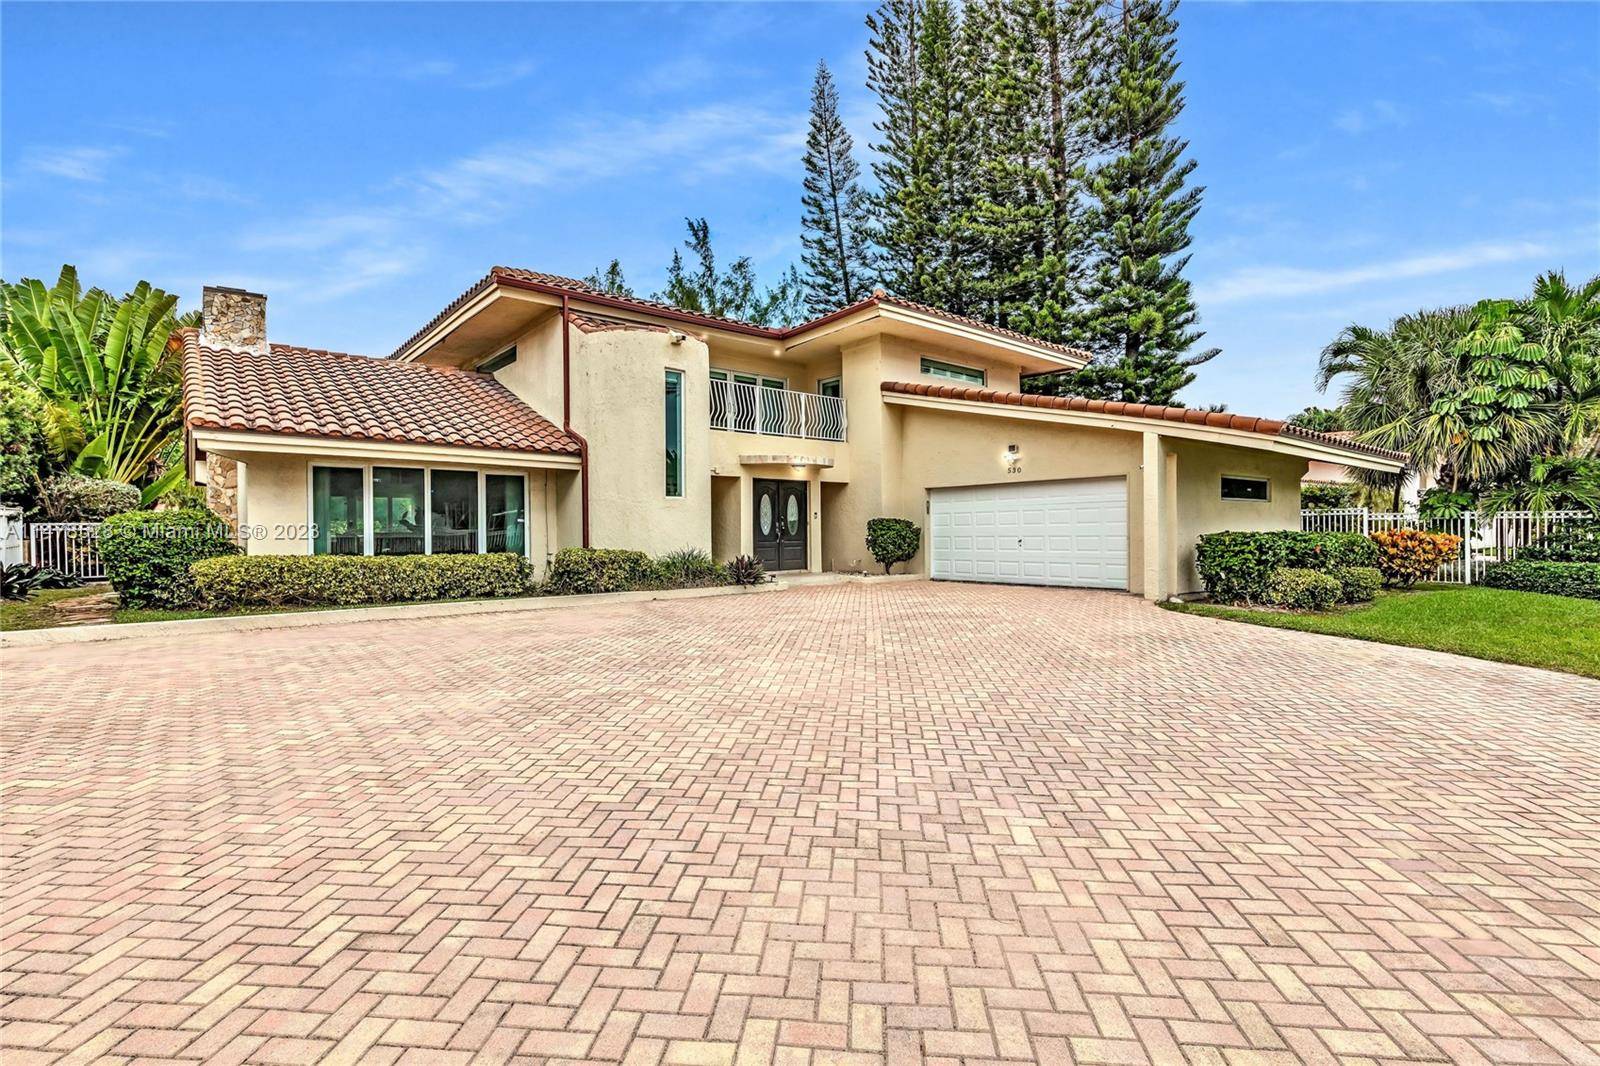 It can be yours Situated in the prestigious Golden Beach Community, this renovated contemporary home has a large and wide lot of over 12, 500 ft.